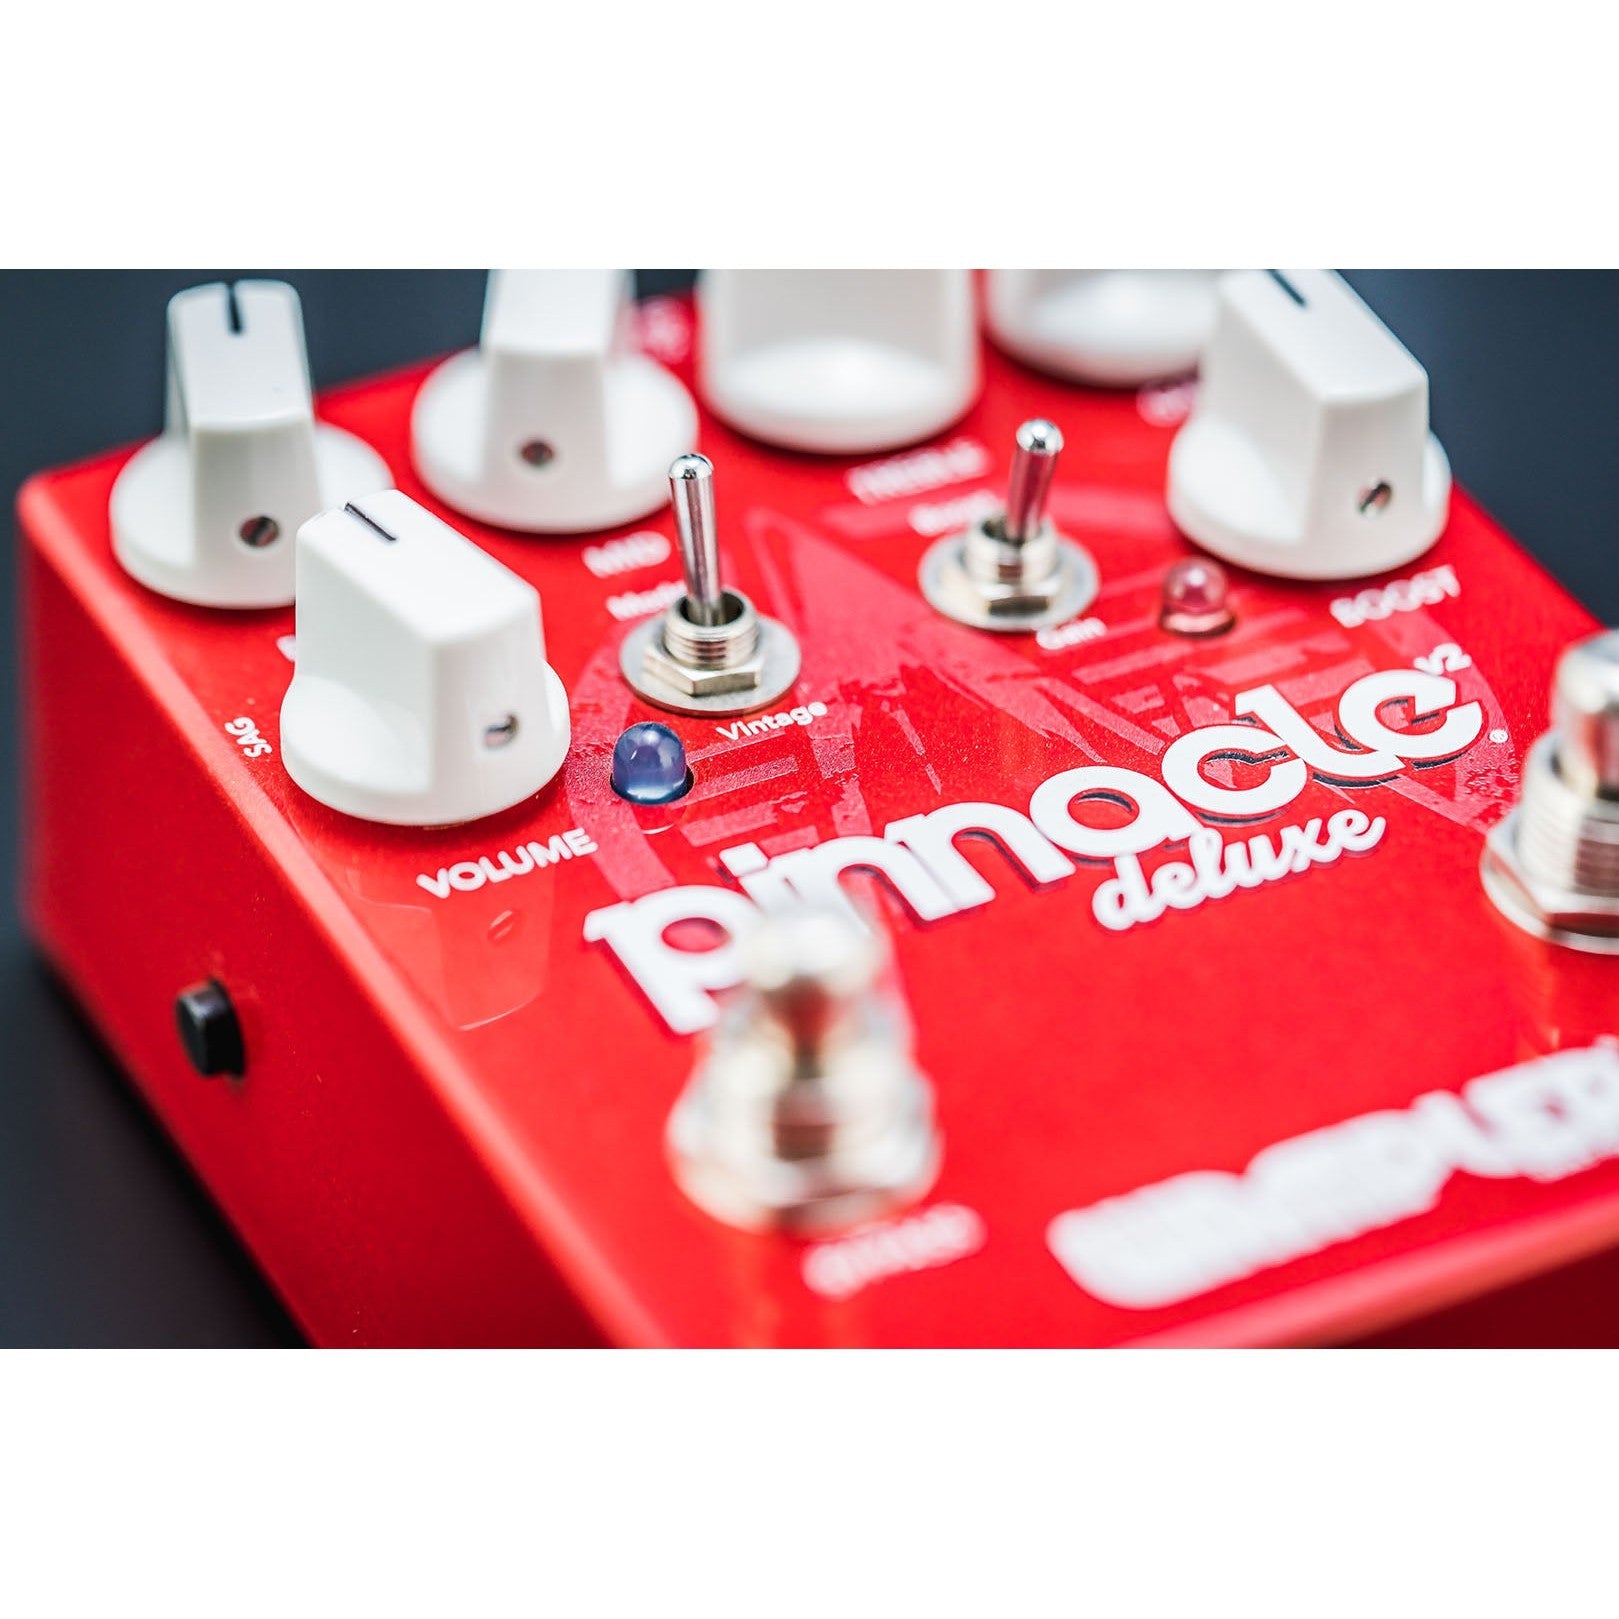 Pedal Guitar Wampler Pinnacle Deluxe V2 Overdrive - Việt Music